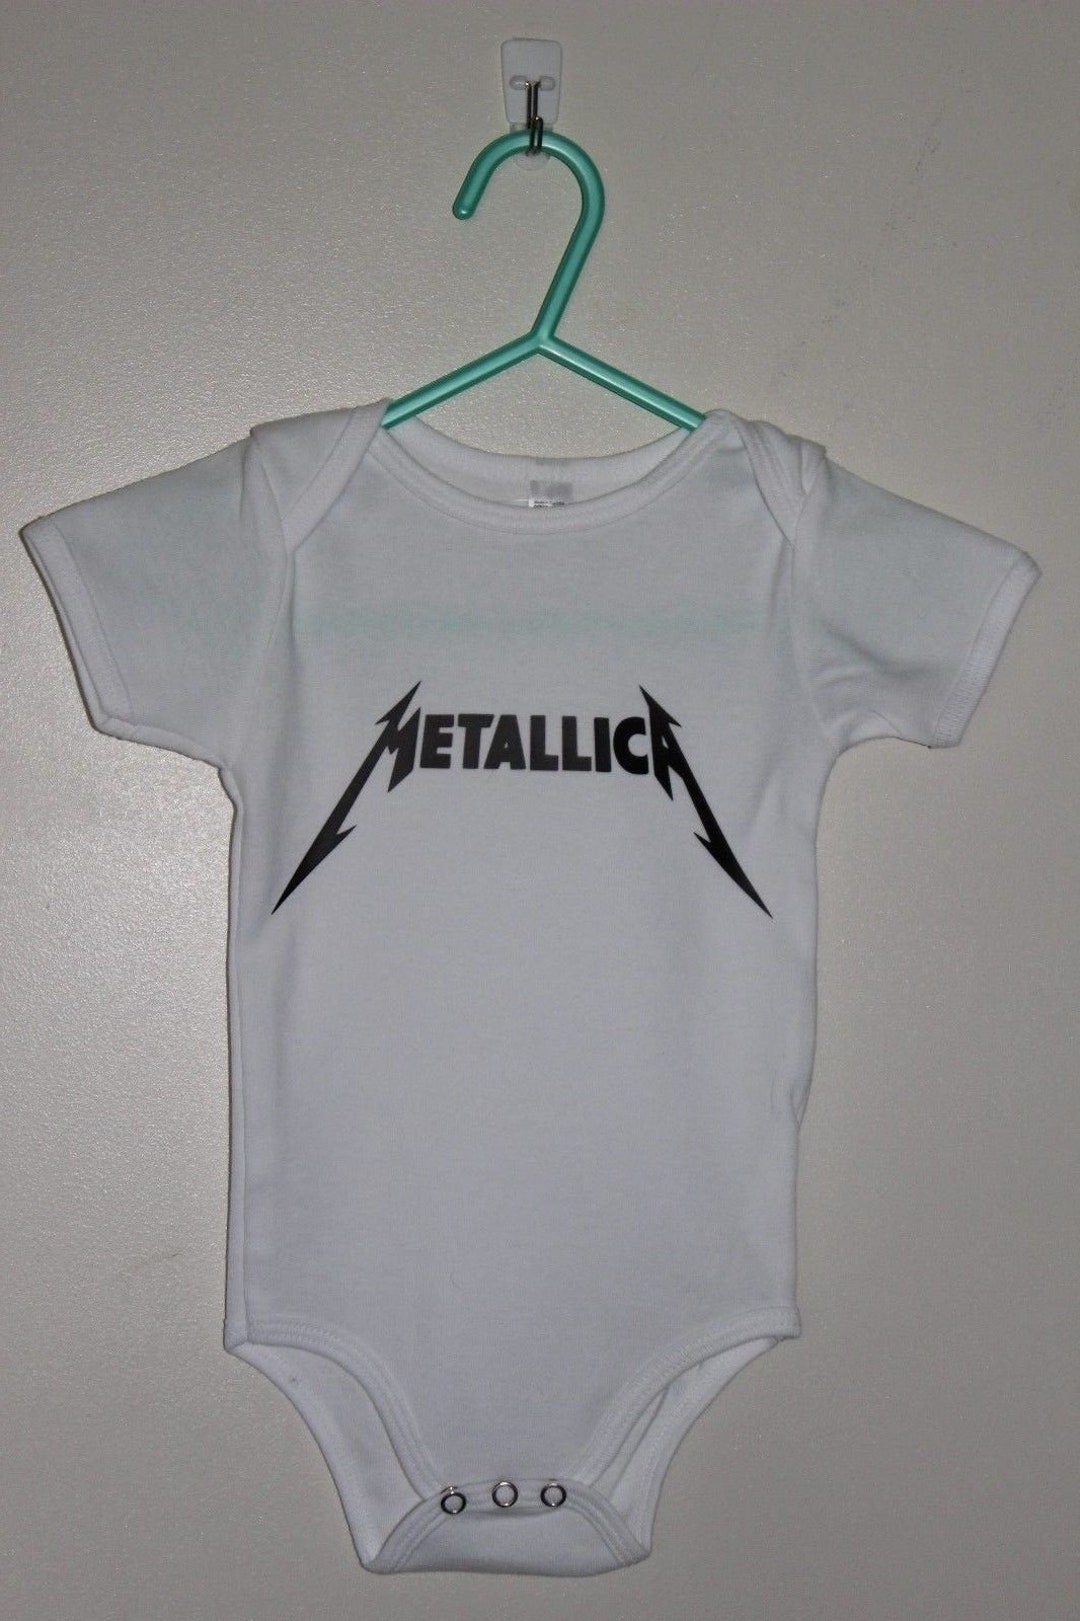 METALLICA Baby Romper Suit White and Blackcool - Etsy